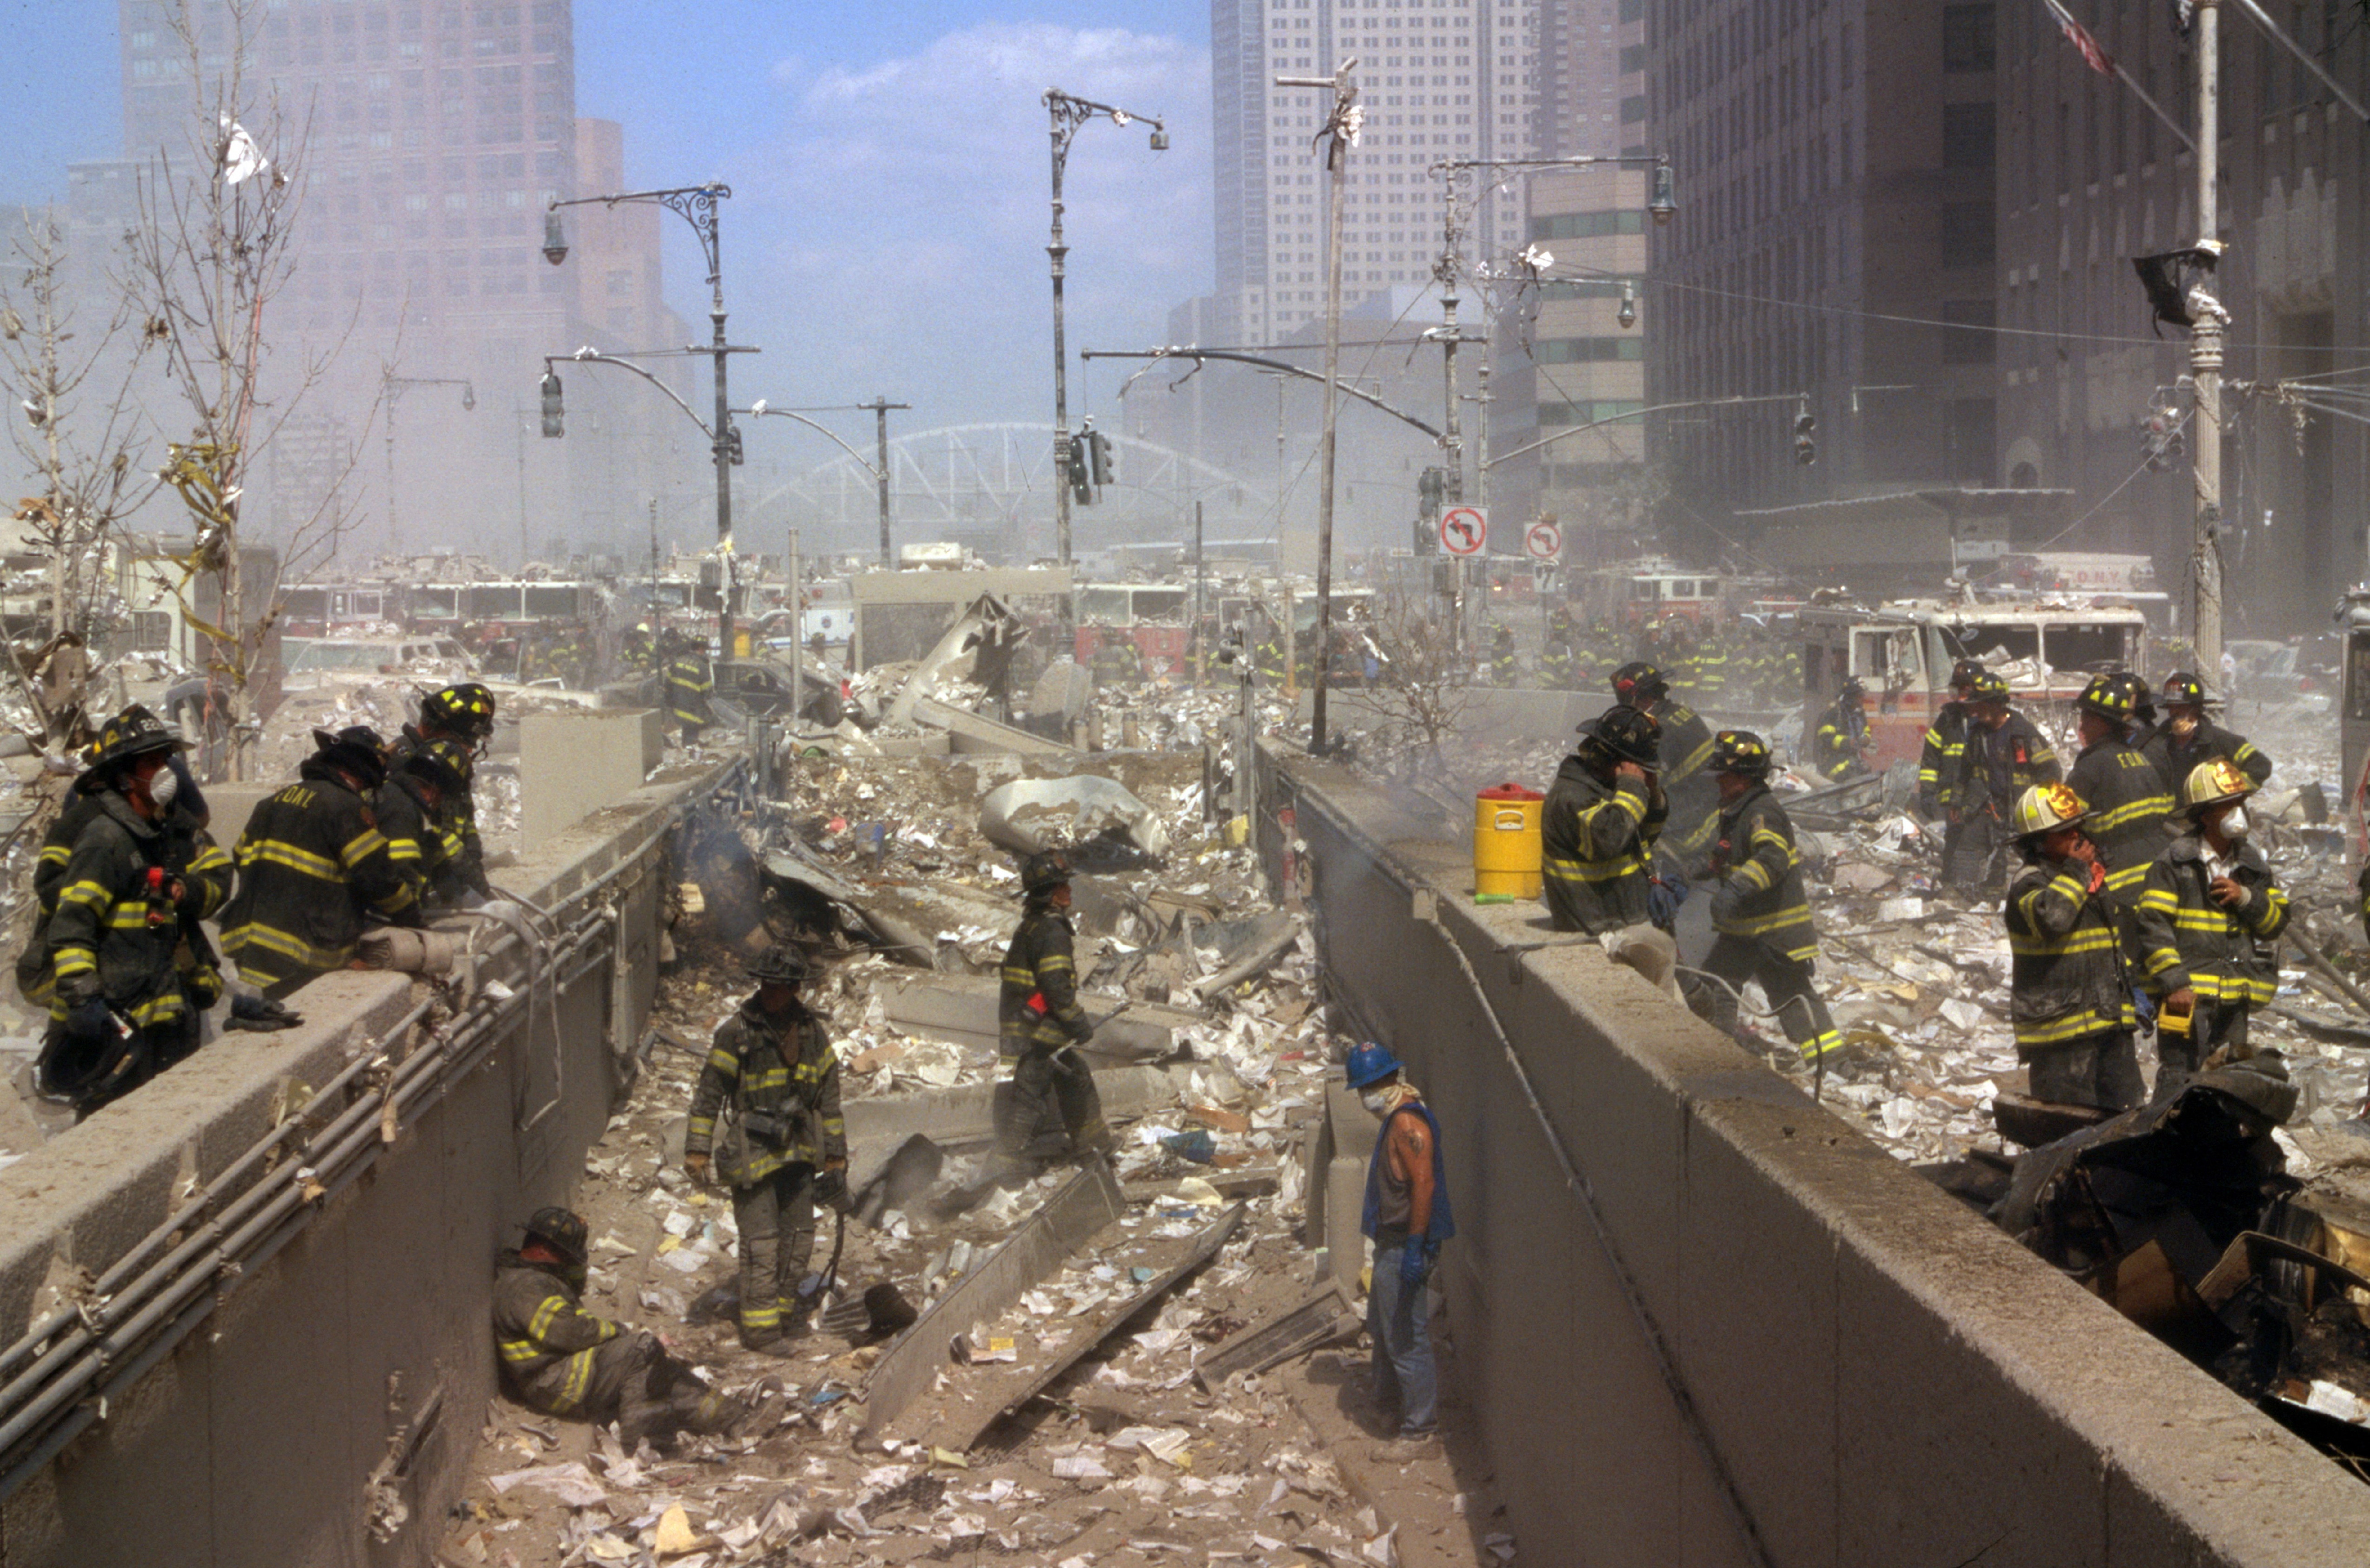 New York firefighters amid the rubble of the World Trade Centre following the 9/11 attacks.